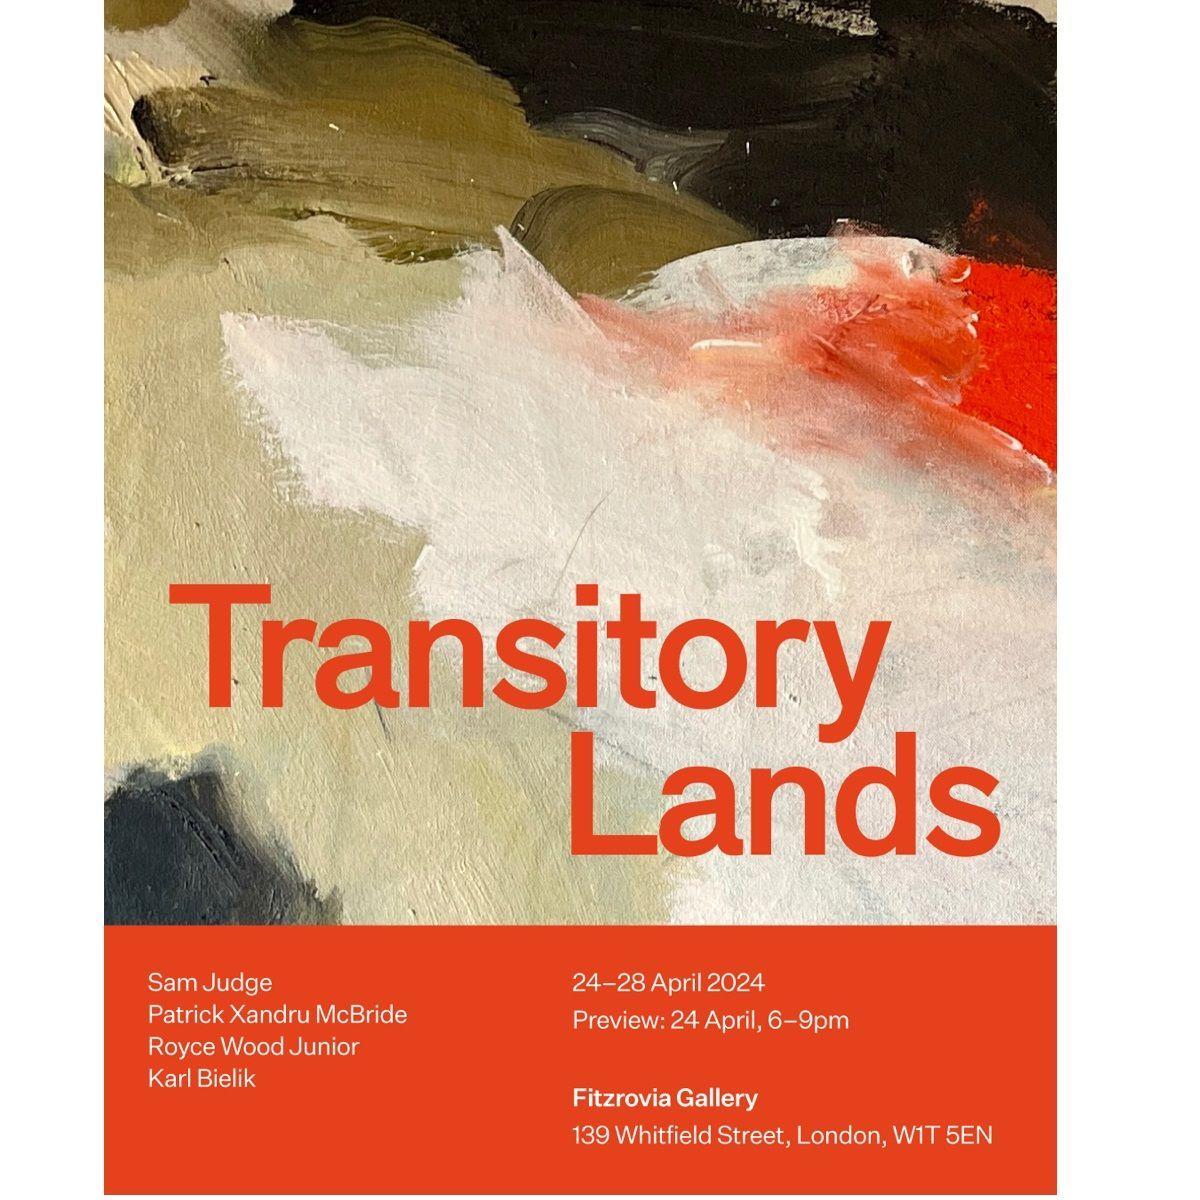 Transitory Lands  | The Fitzrovia Gallery